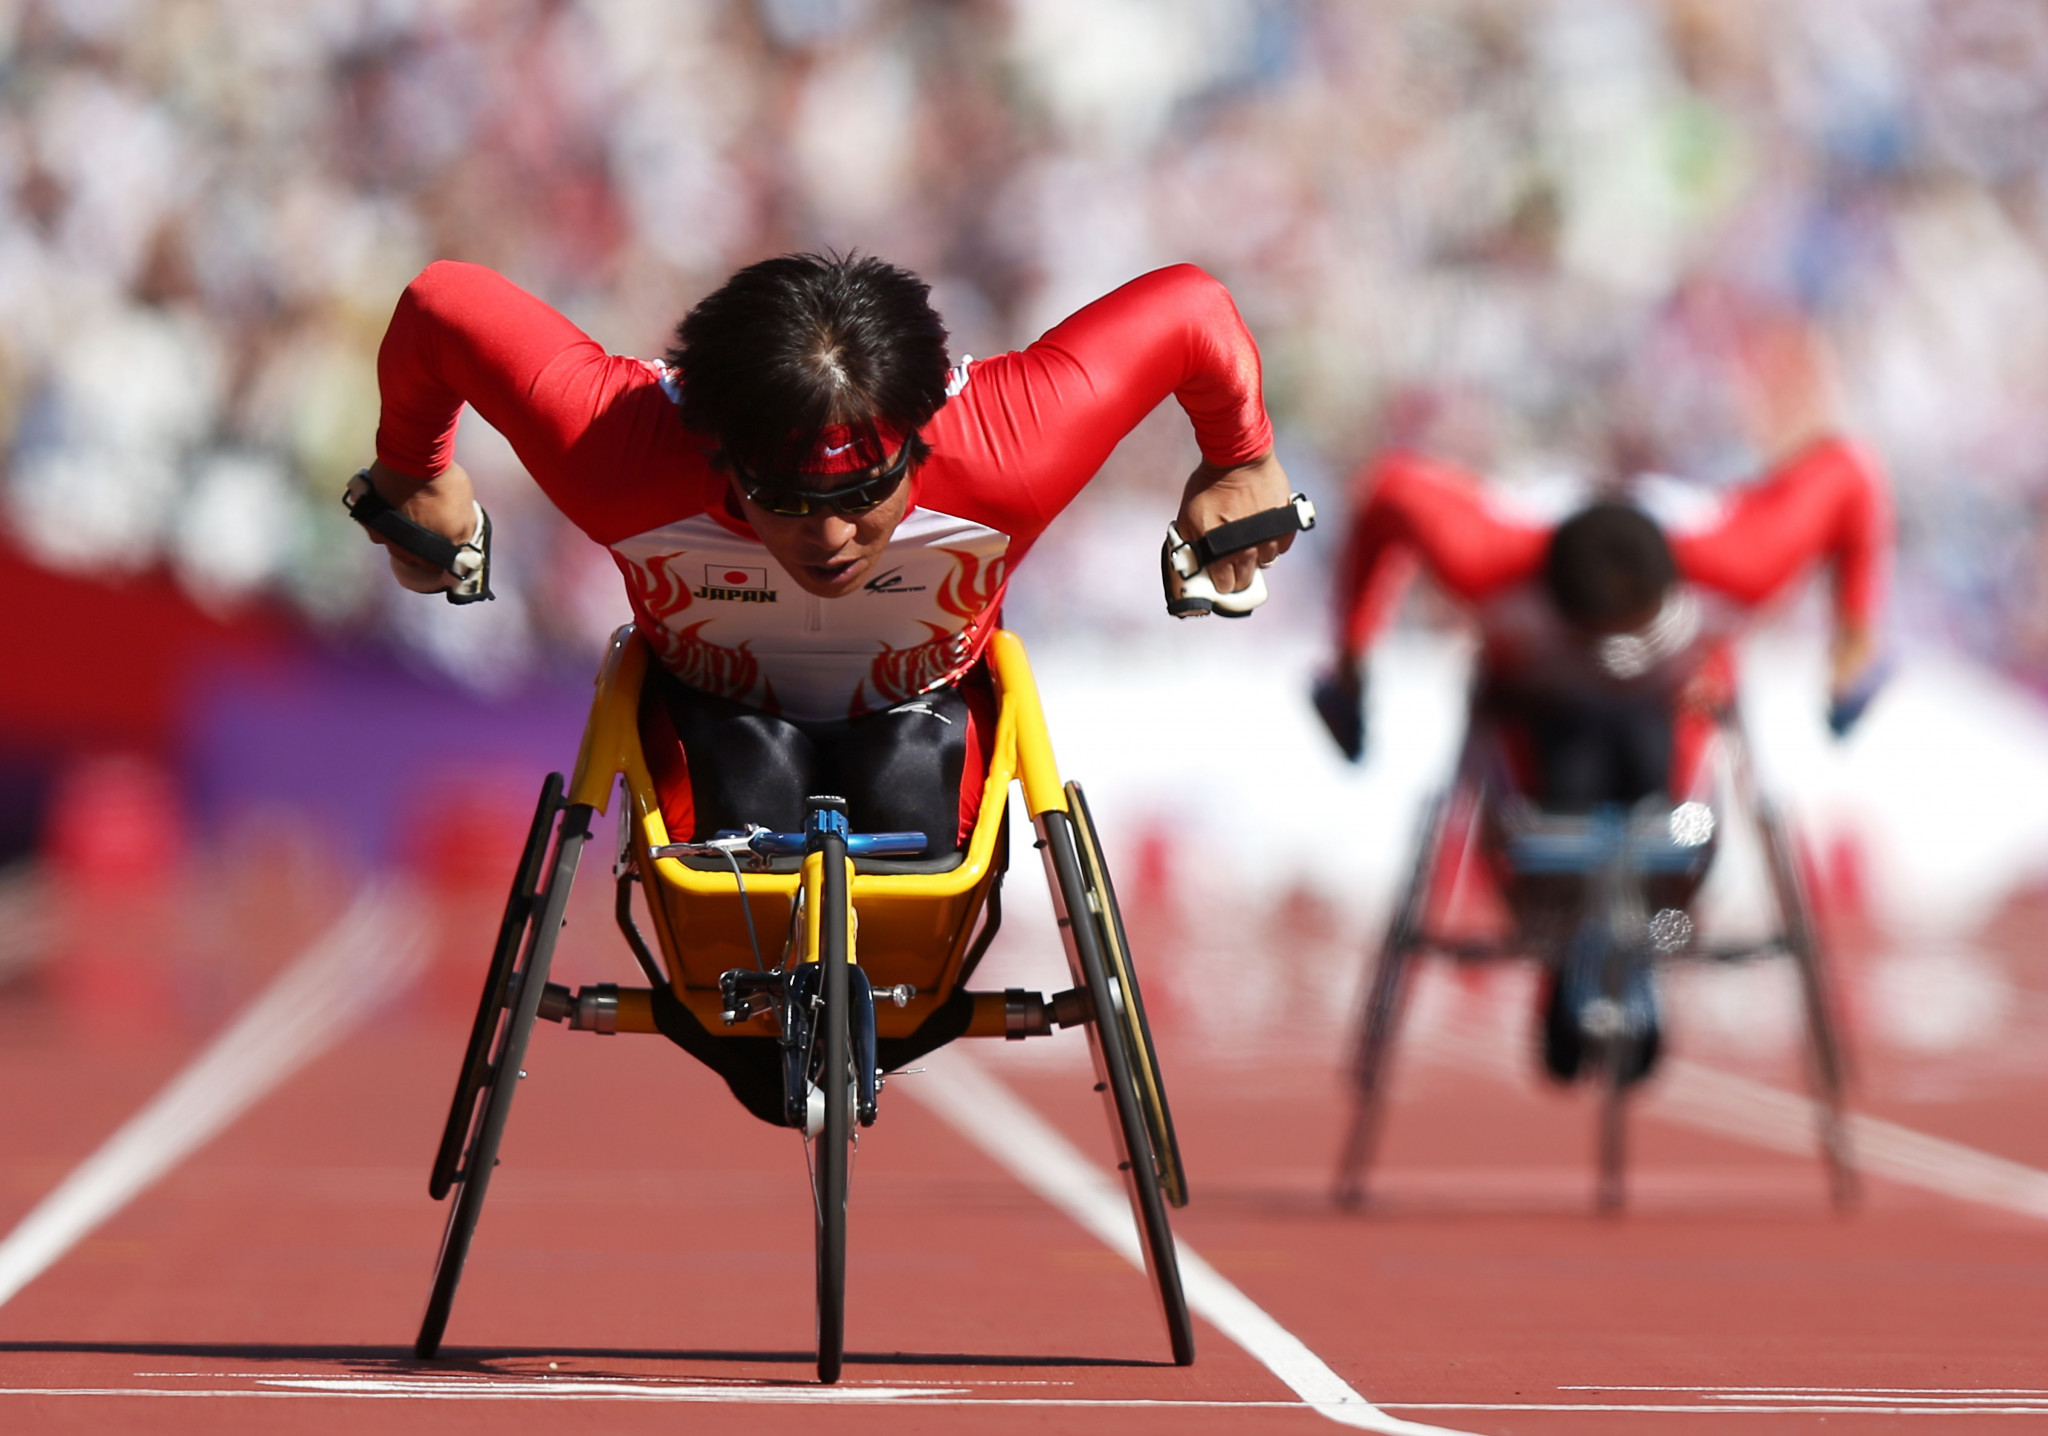 Tomoya Ito is refusing to compete in this weekend's Japan Para Athletics Championships due to COVID-19 concerns ©Getty Images